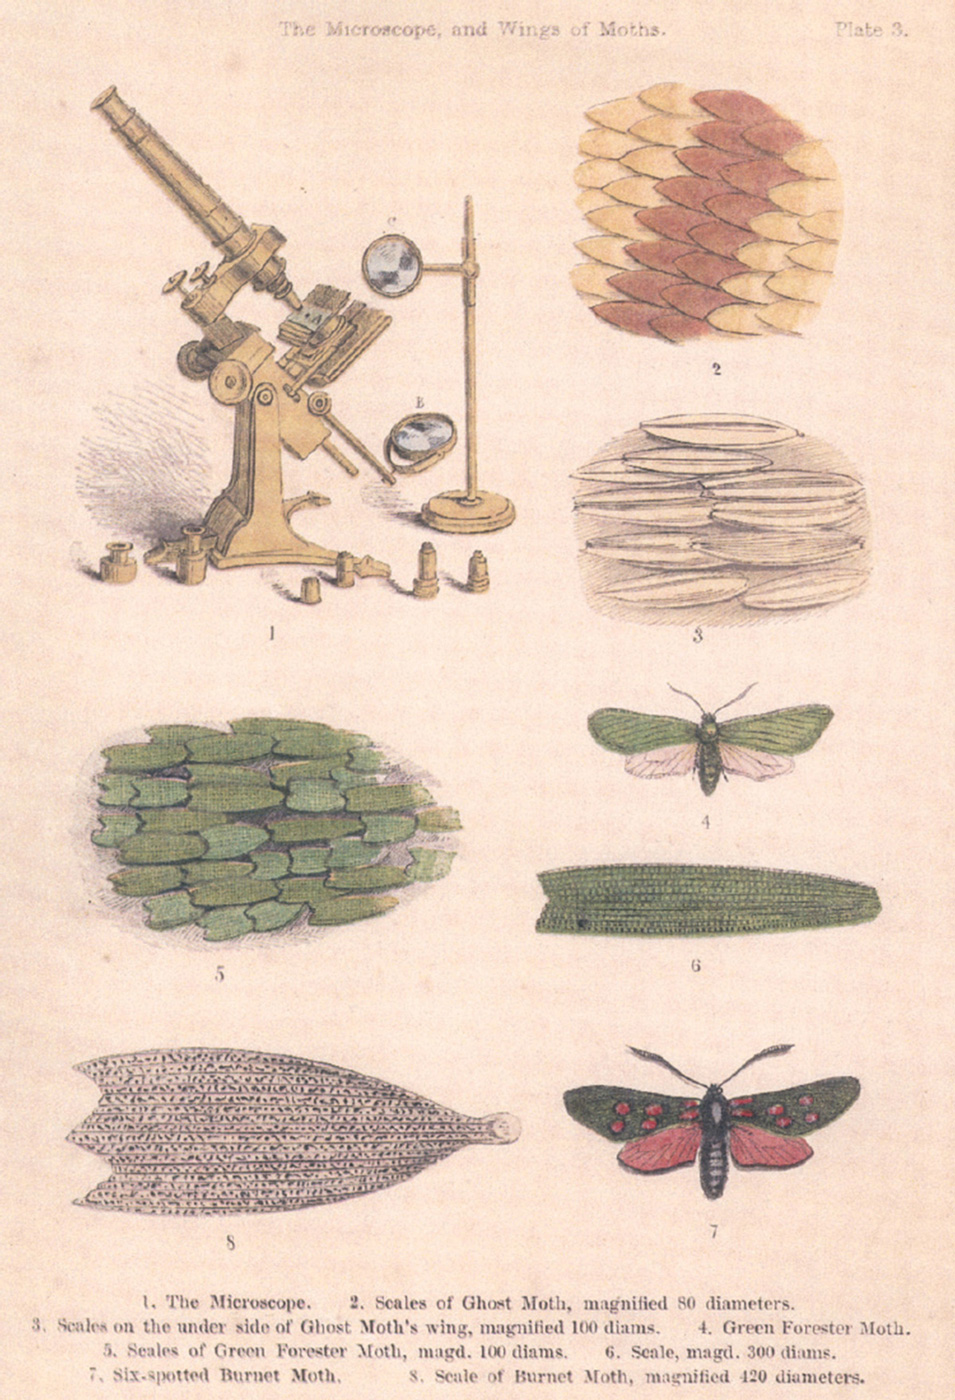 An illustration from Mary Ward’s A World of Wonders Revealed by the Microscope (1858).